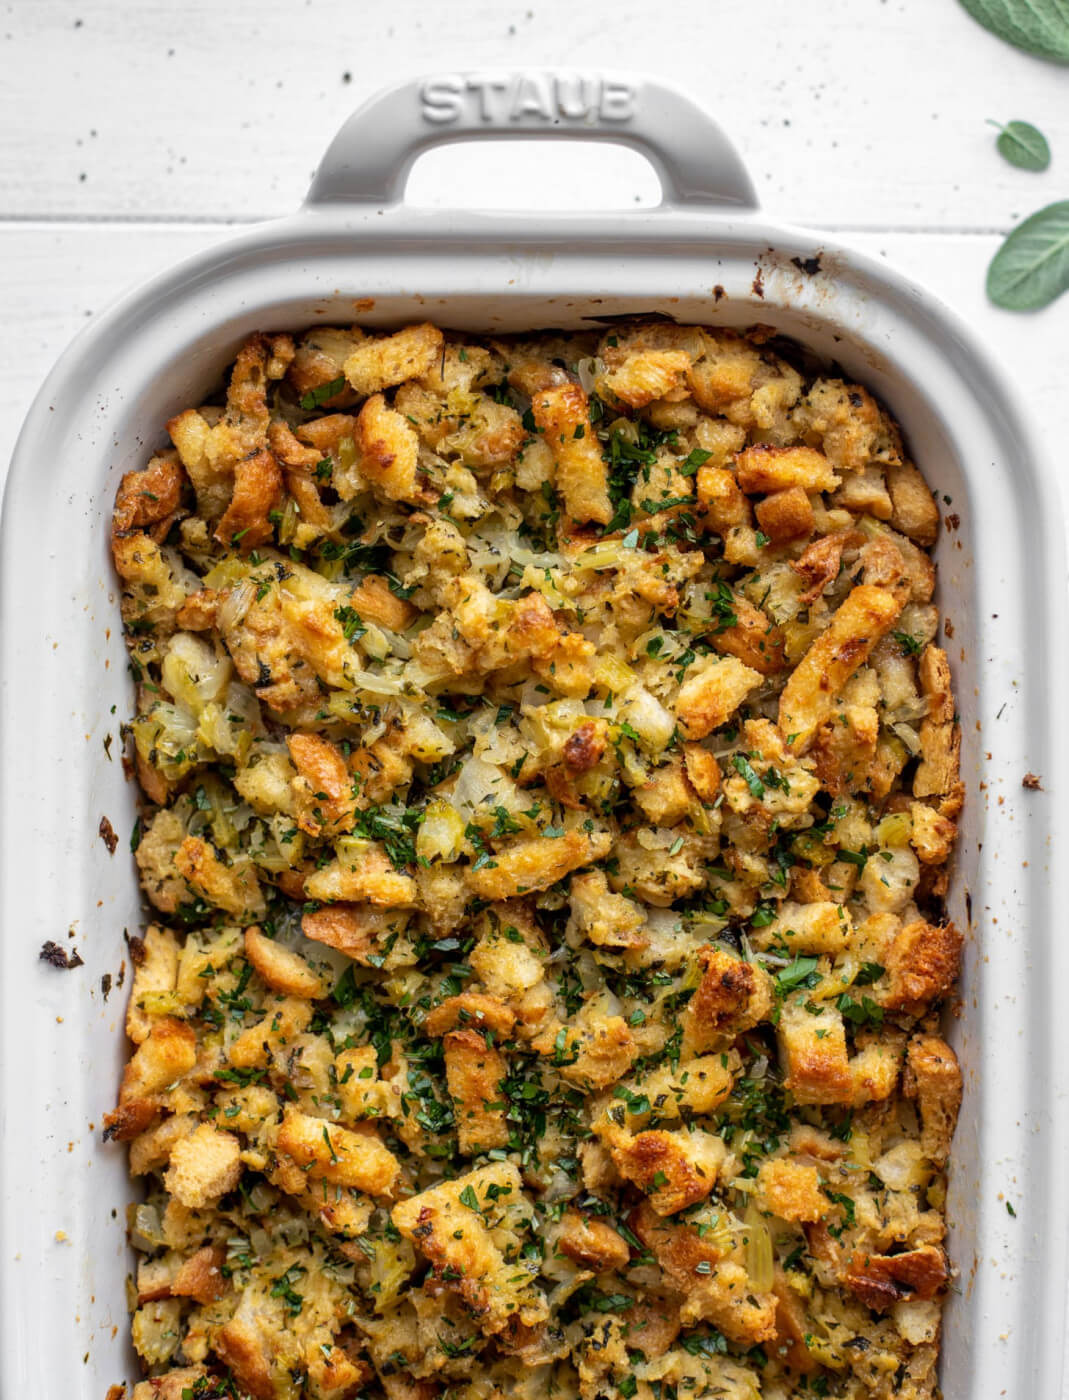 Incredible Buttery Herb Stuffing